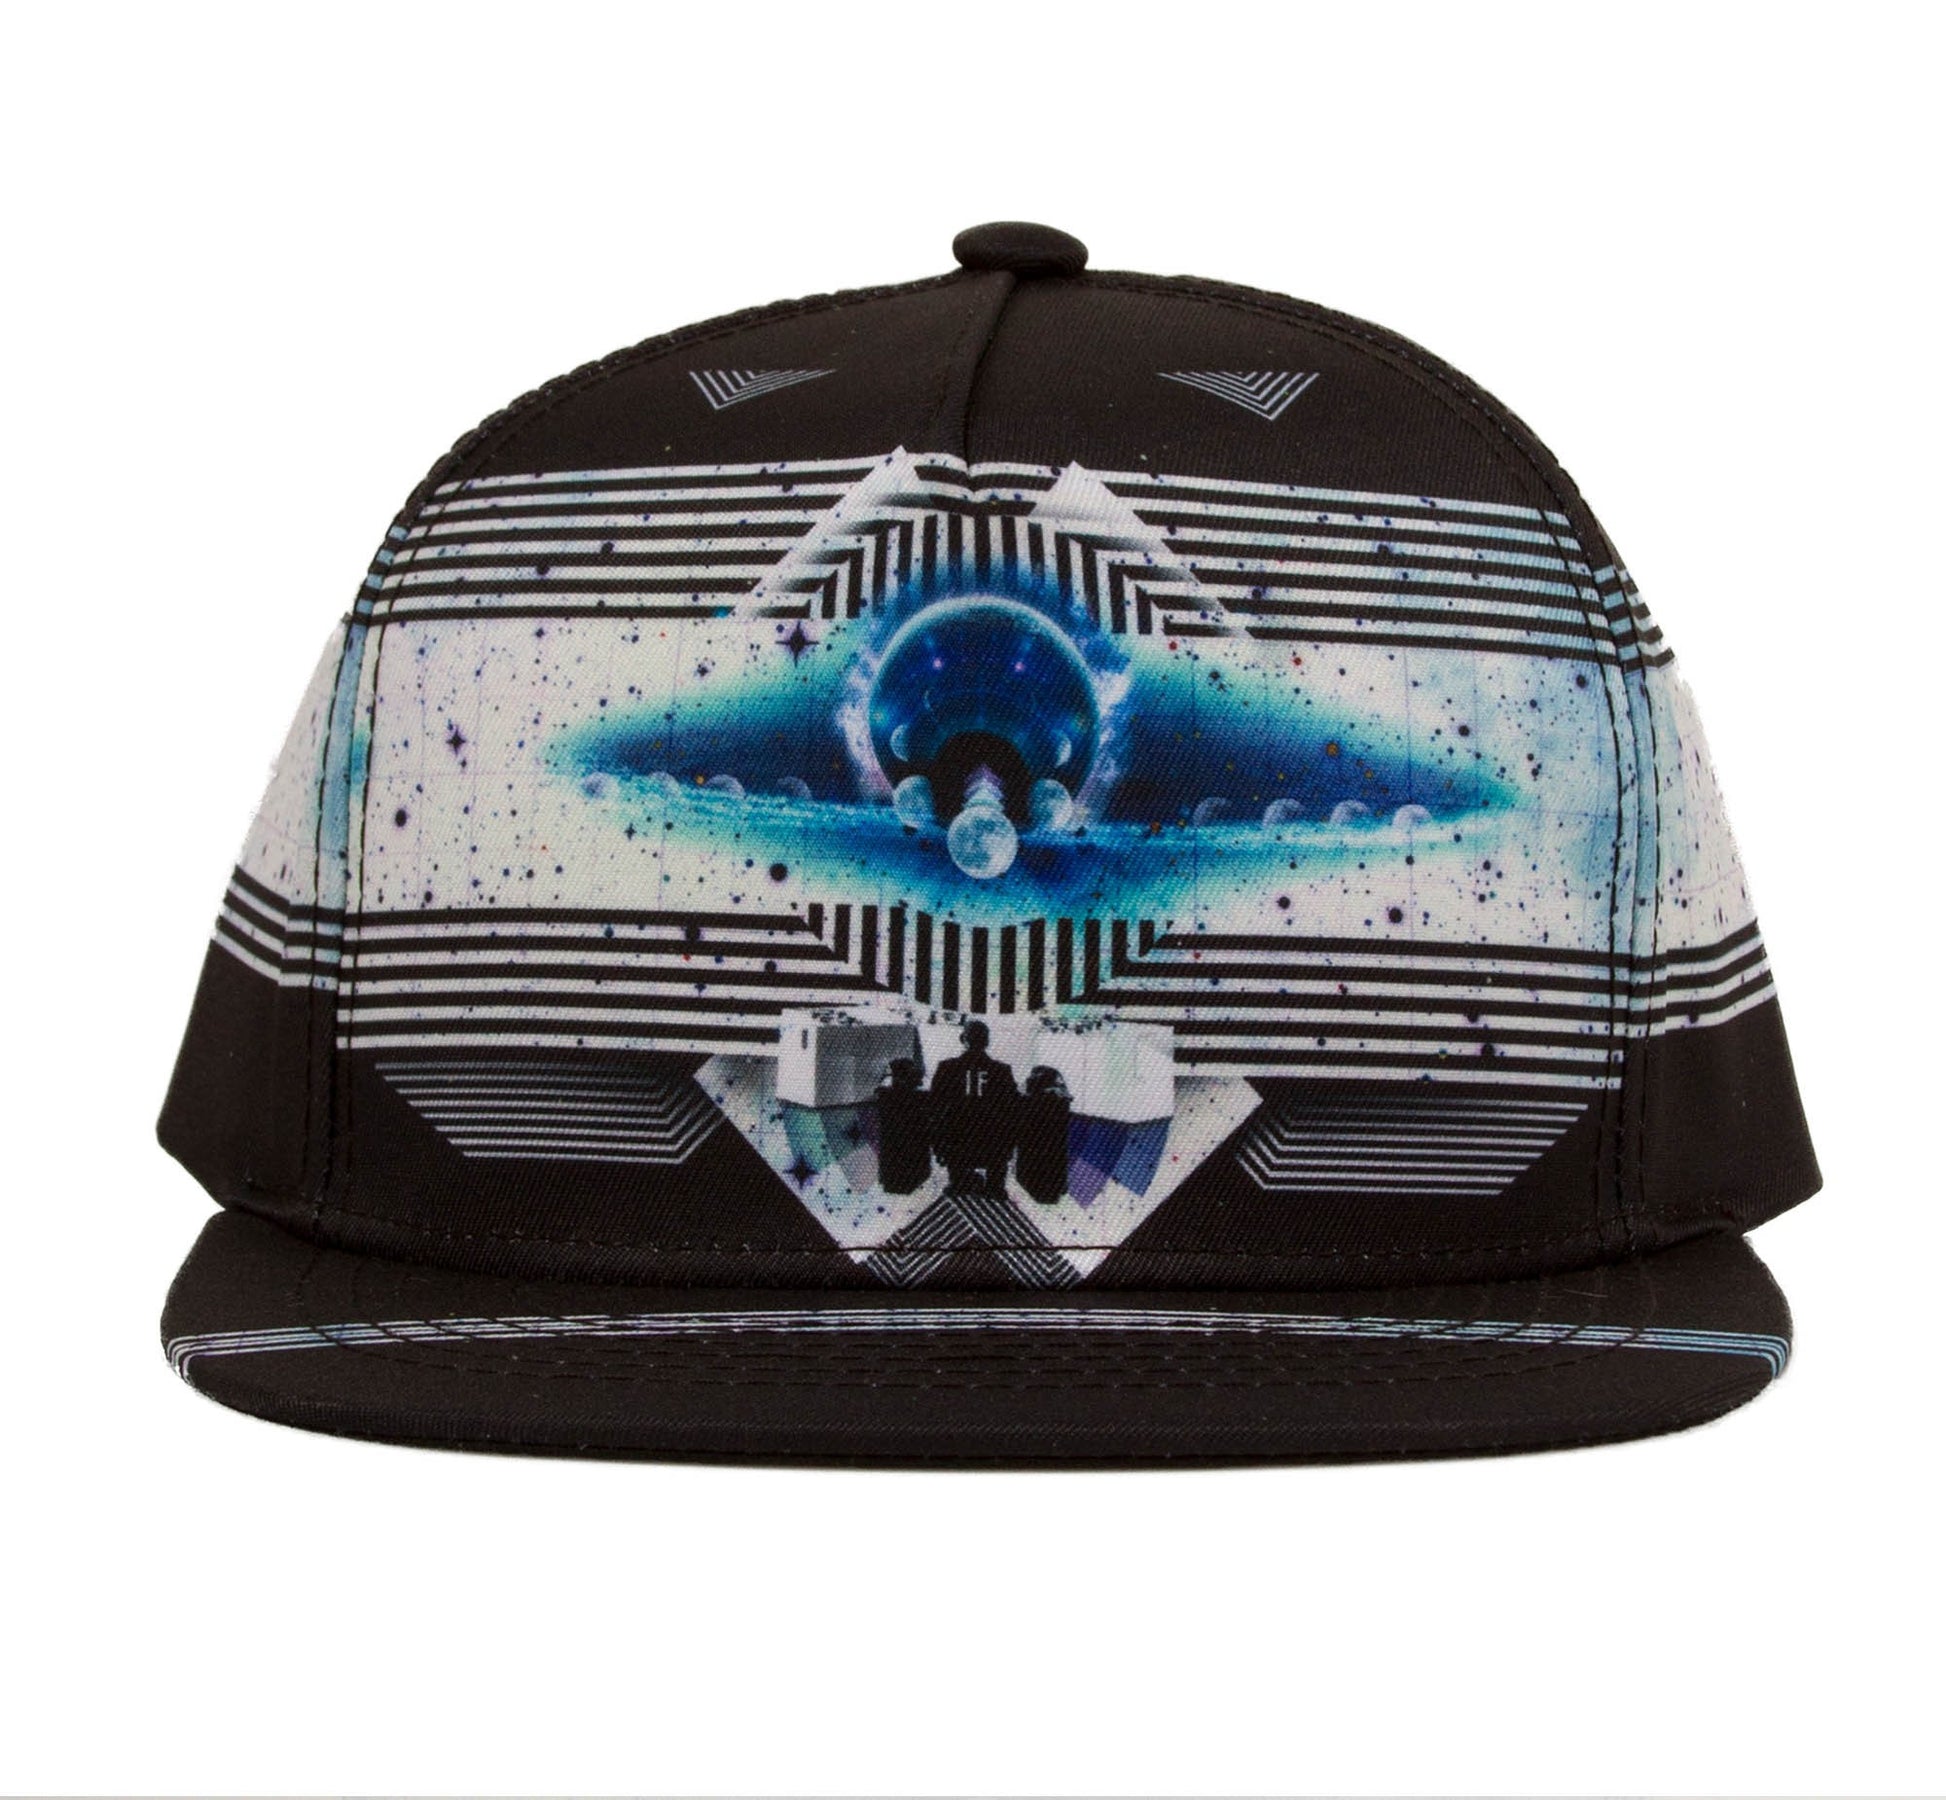 Imaginary Foundation - Mission Control Snapback - The Giant Peach